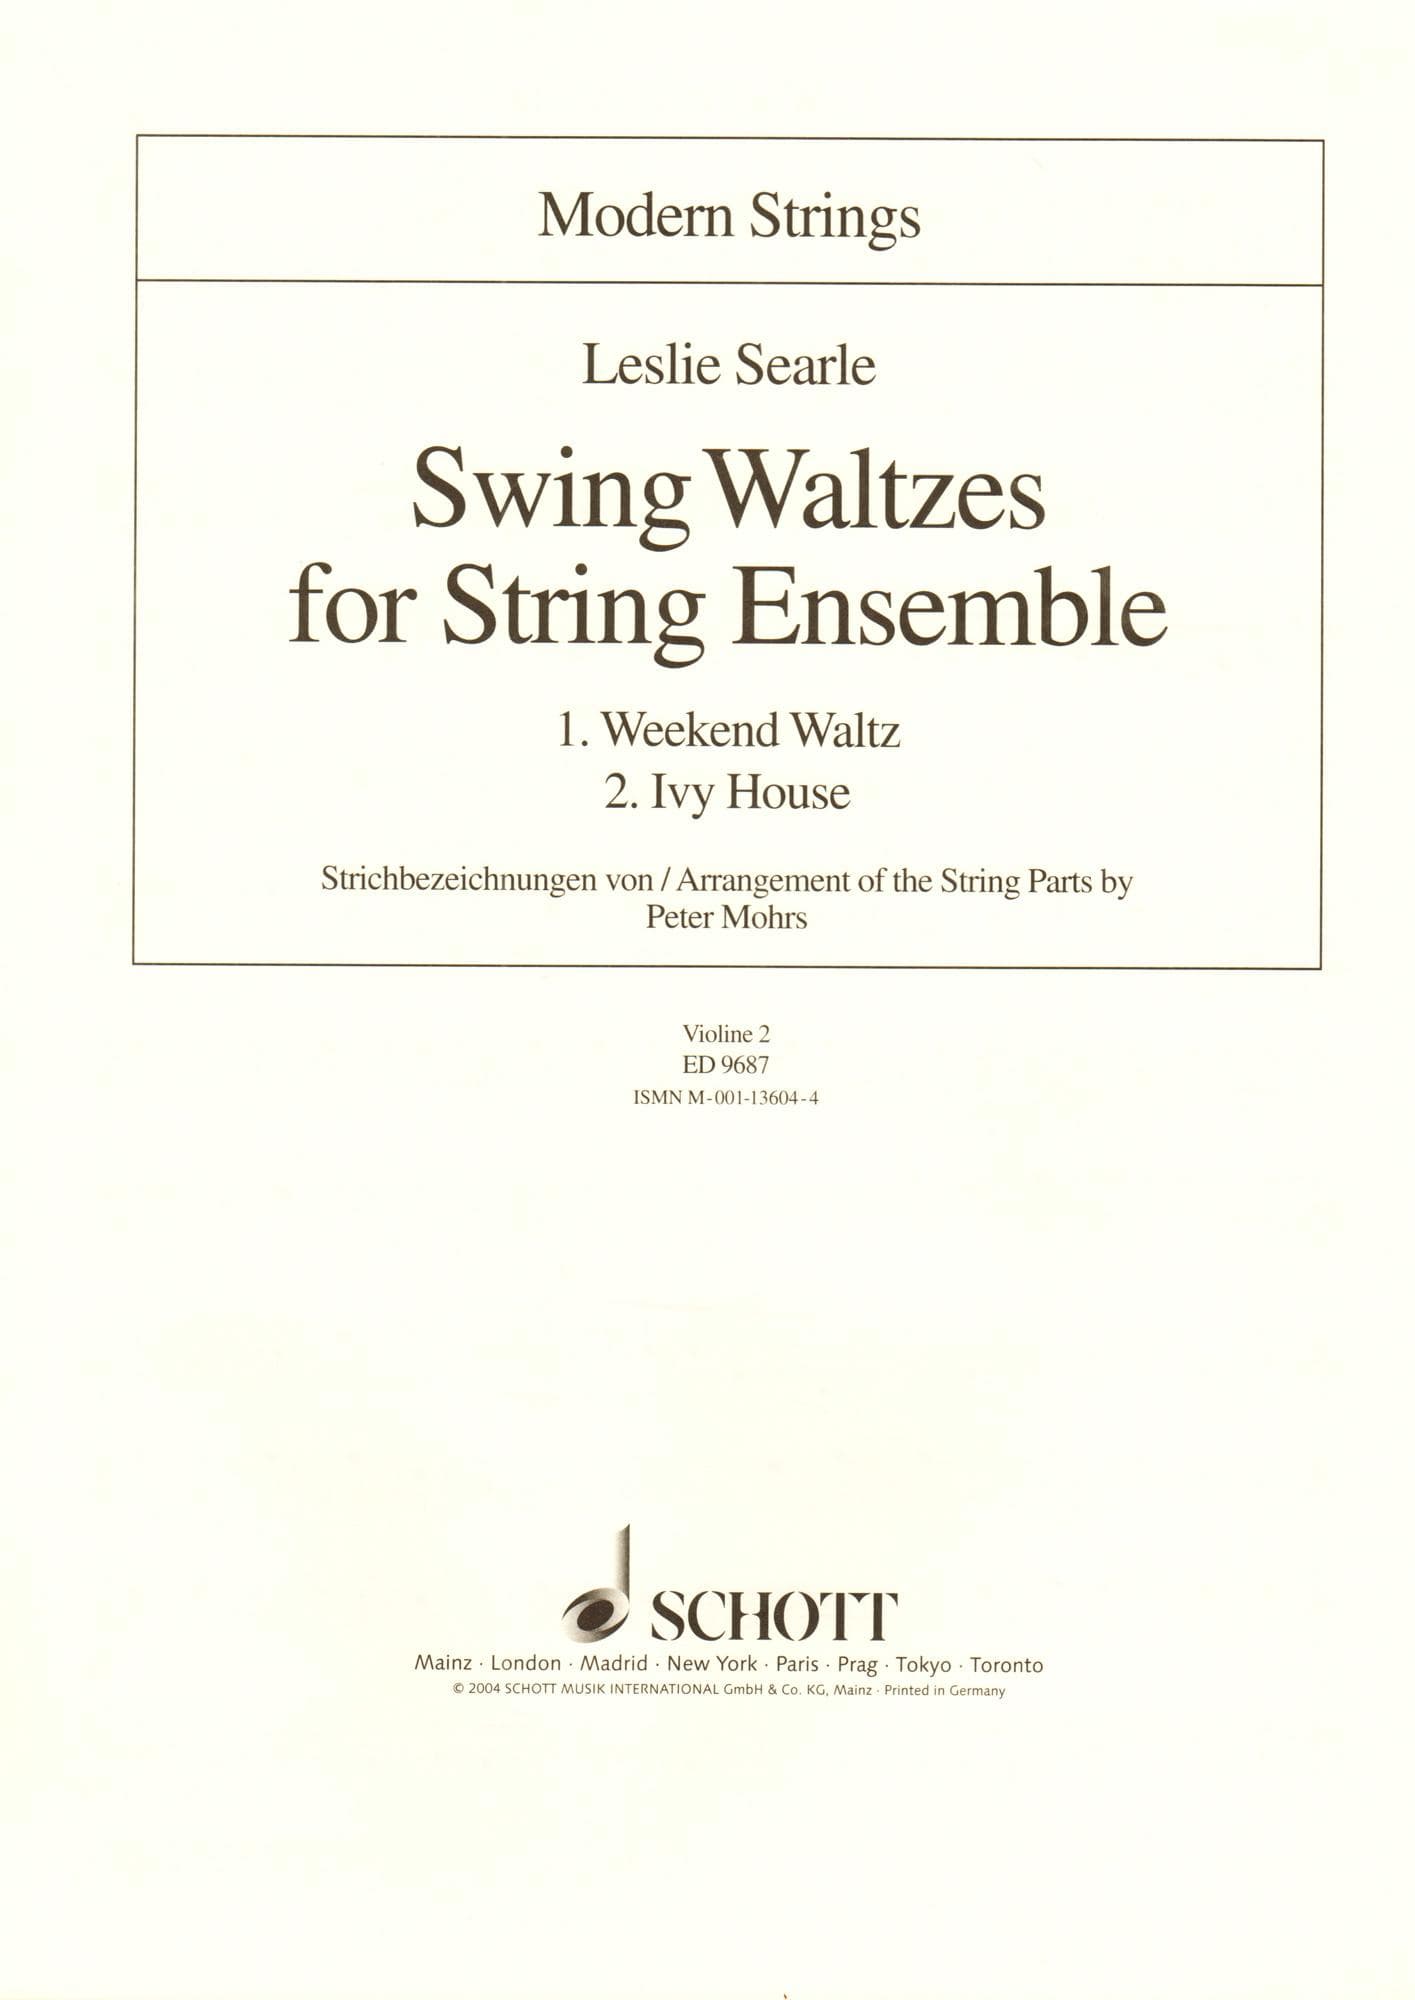 Searle, Leslie - Swing Waltzes for String Ensemble Score and Parts Published by Schott Music